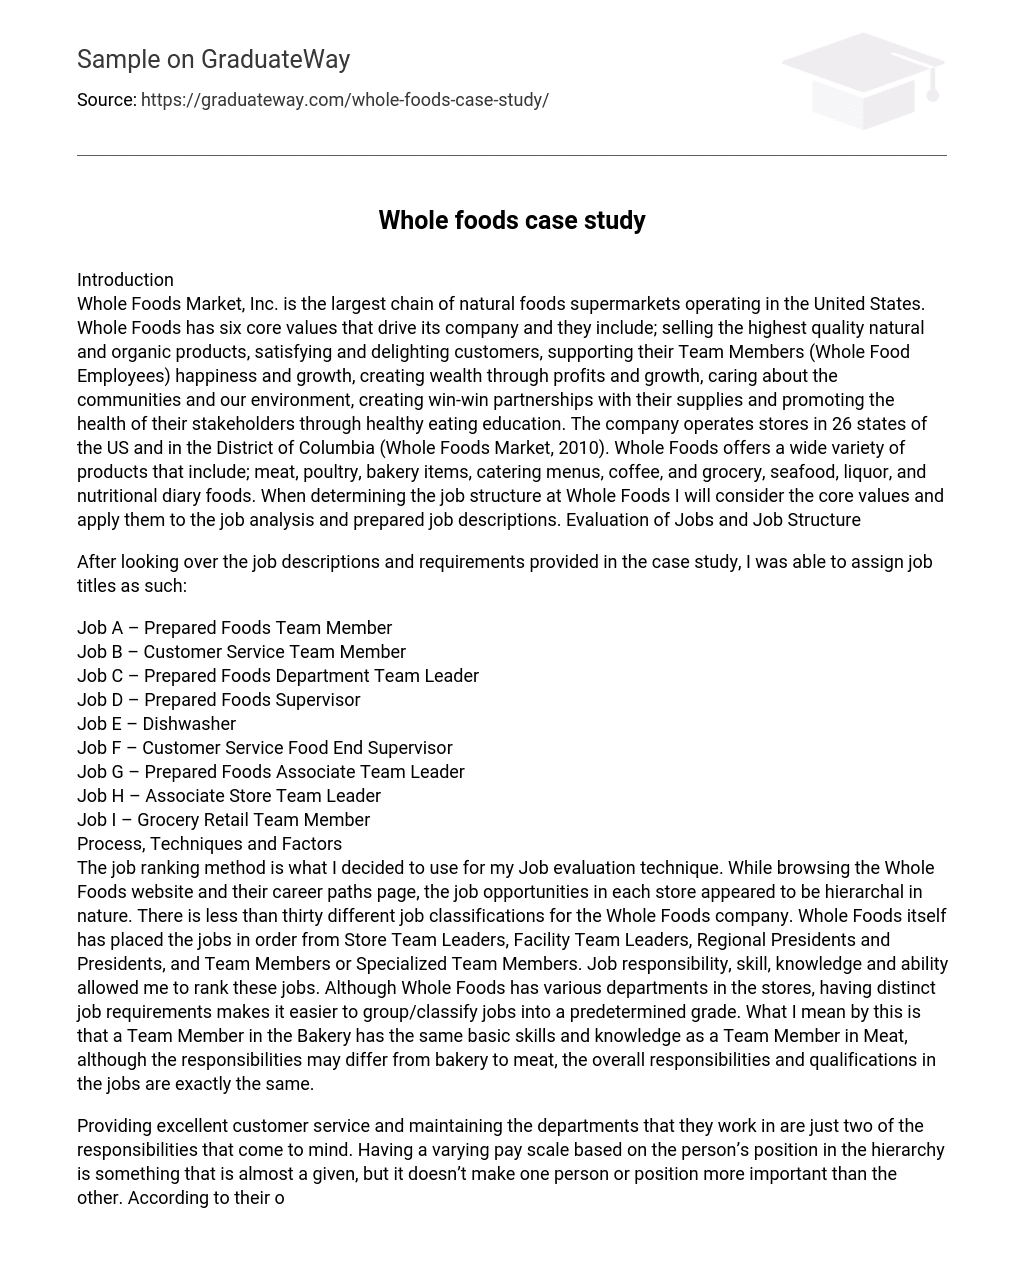 Whole foods case study